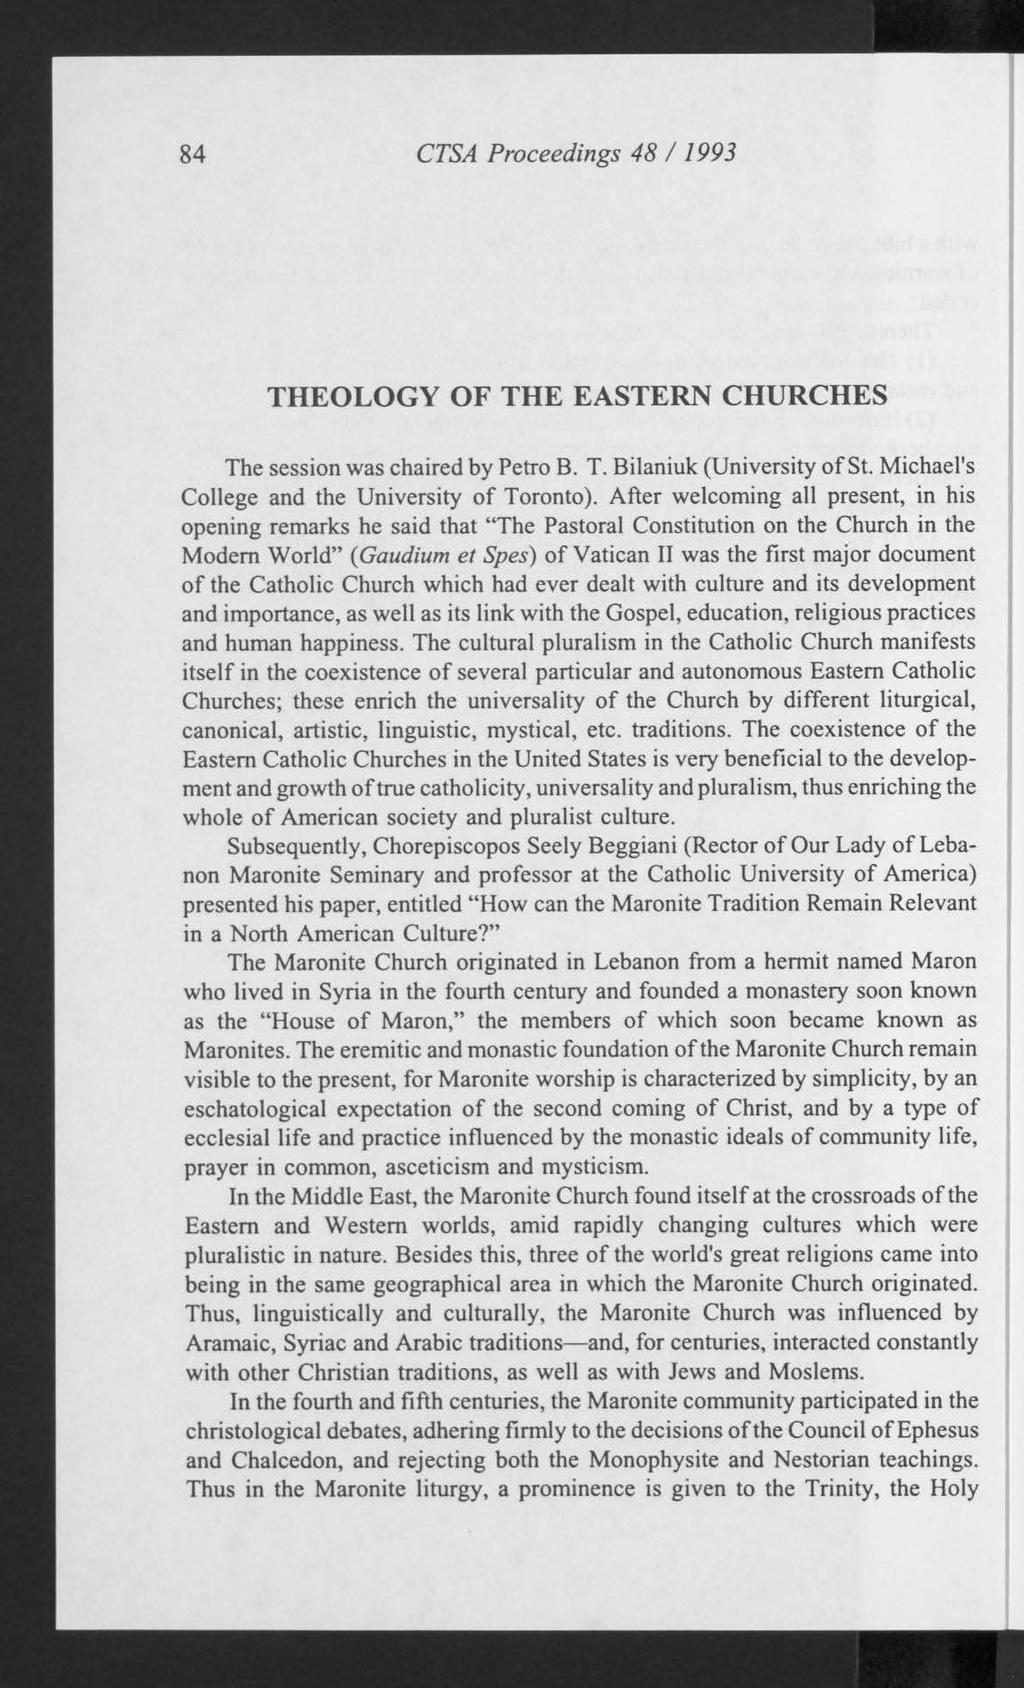 84 CTSA Proceedings 48 / 1993 THEOLOGY OF THE EASTERN CHURCHES The session was chaired by Petro B. T. Bilaniuk (University of St. Michael's College and the University of Toronto).